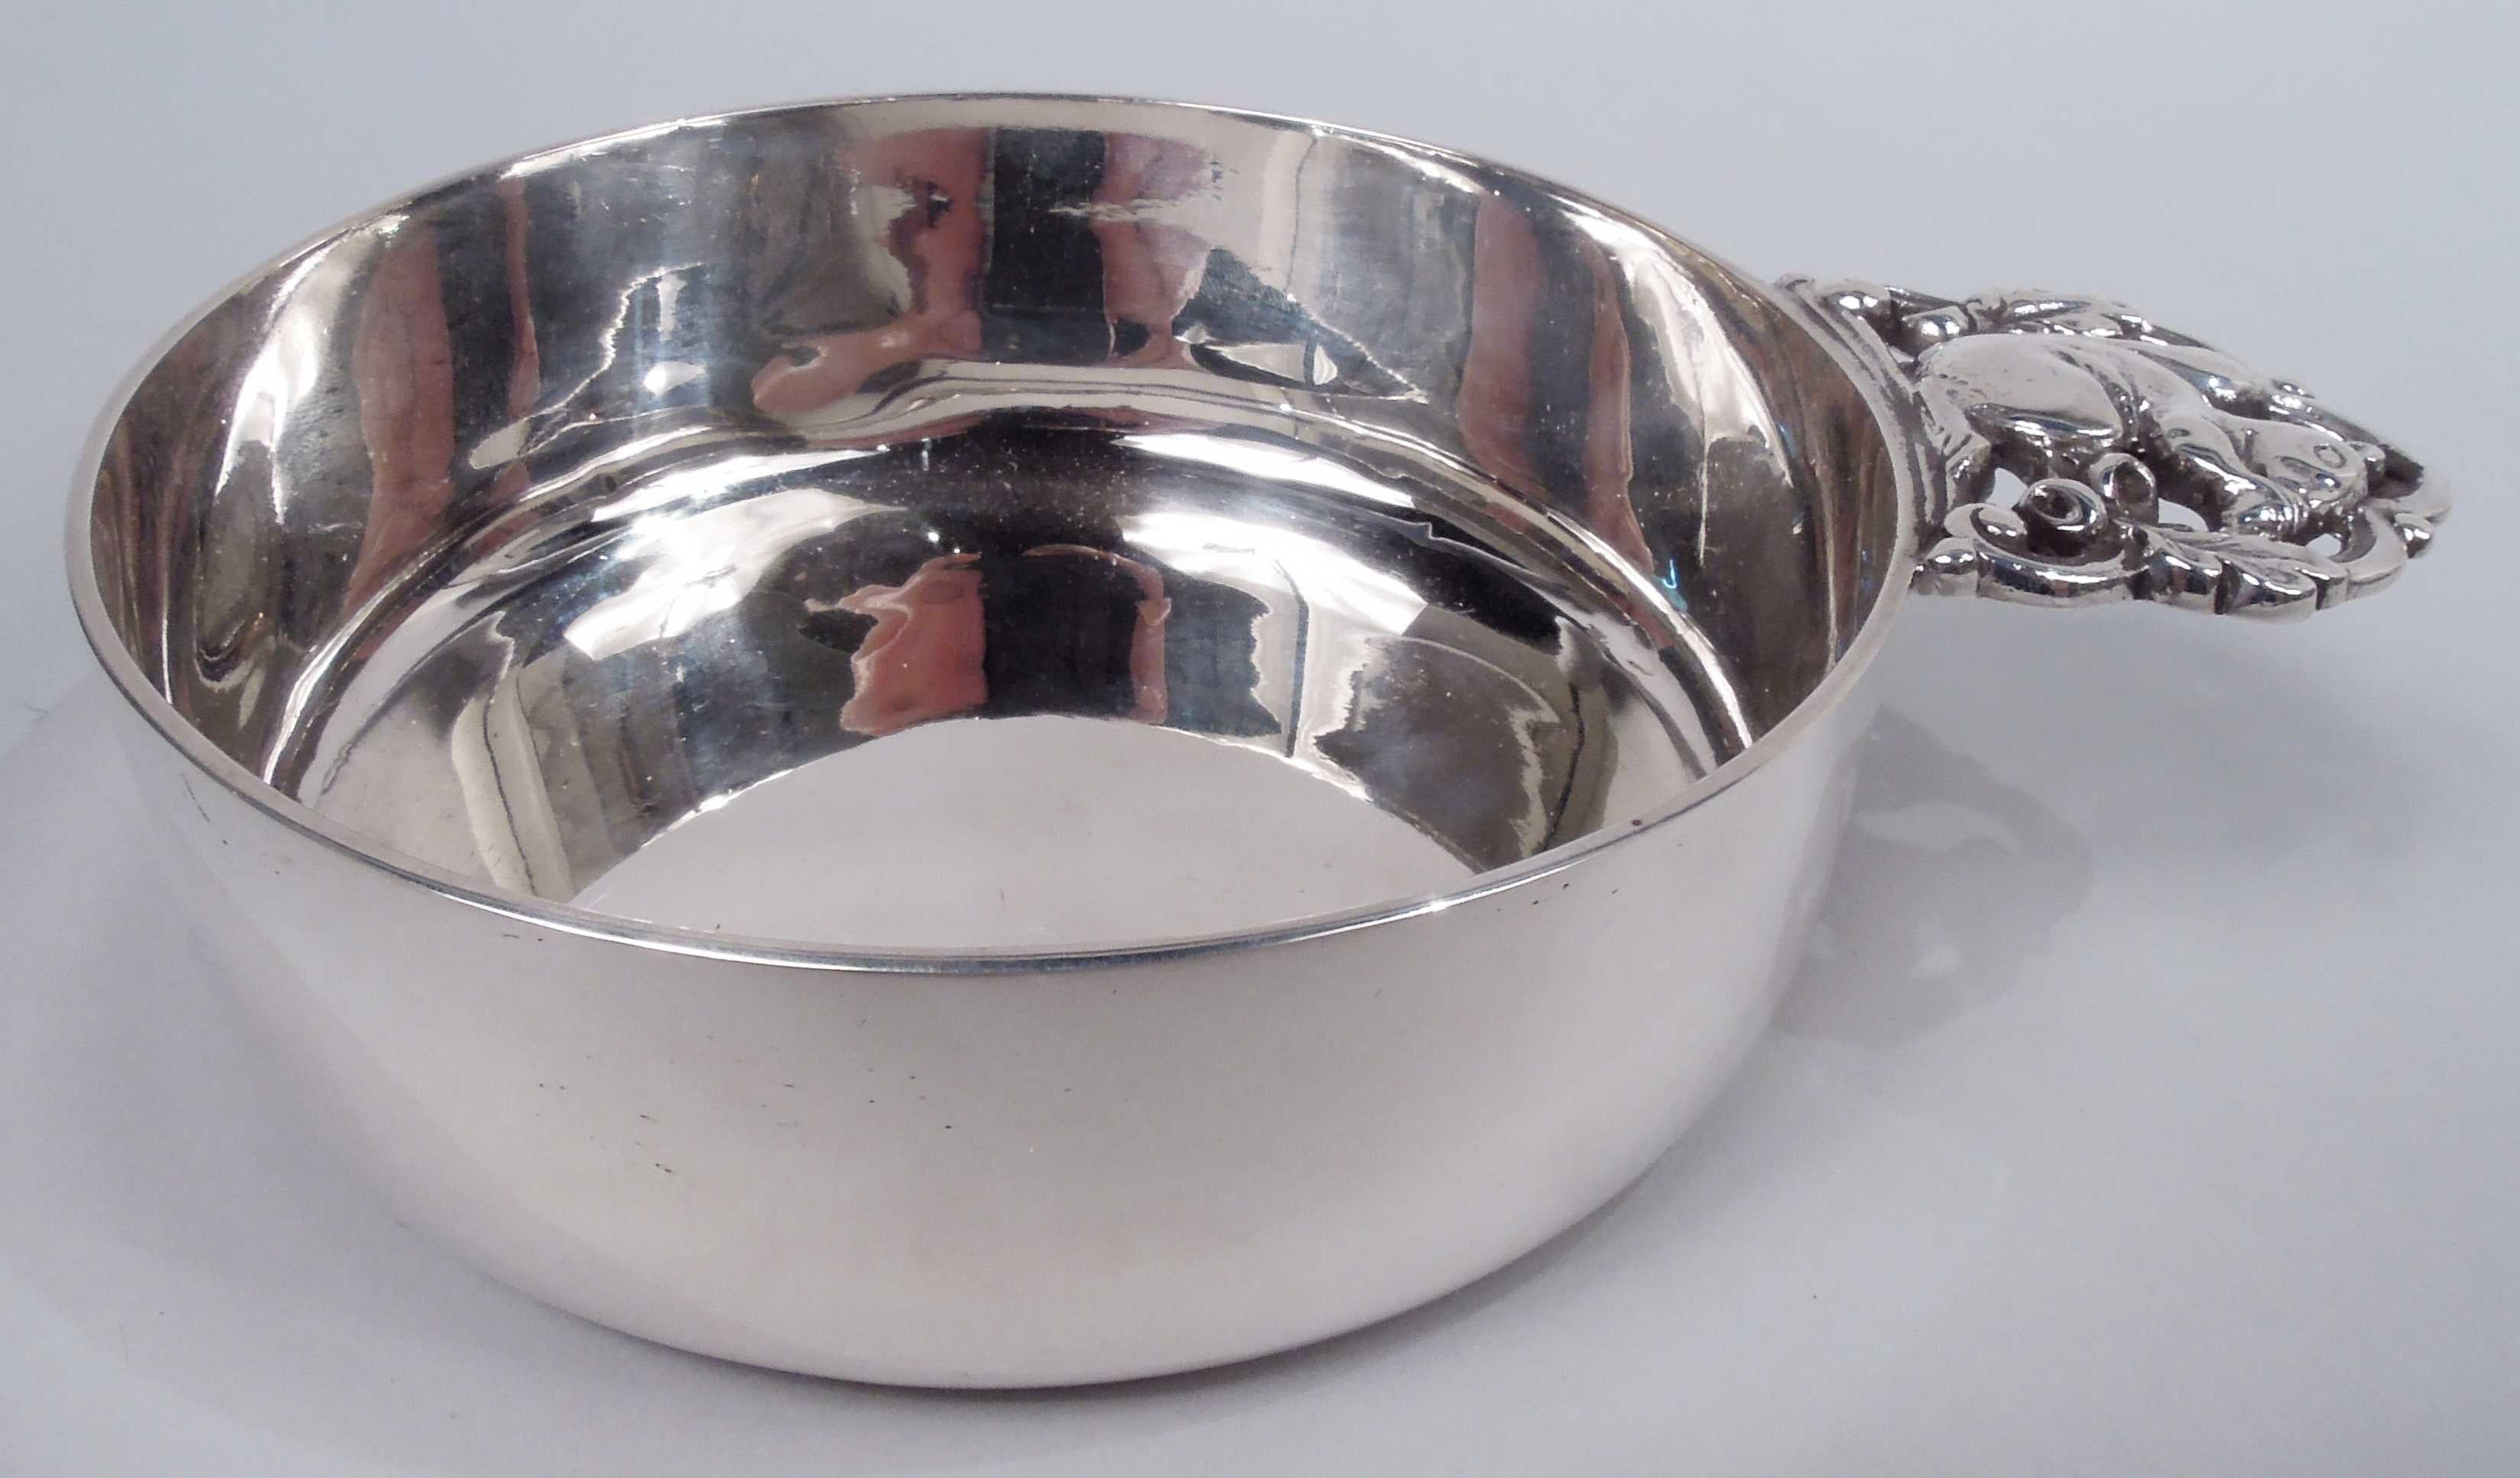 Modern sterling silver porringer. Made by Tiffany & Co. in New York. Round with straight sides. Cast open cinquefoil handle inset with acorn-nibbling squirrel. Fully marked including maker’s stamp, pattern no. 23111, director’s letter m (1907-47),